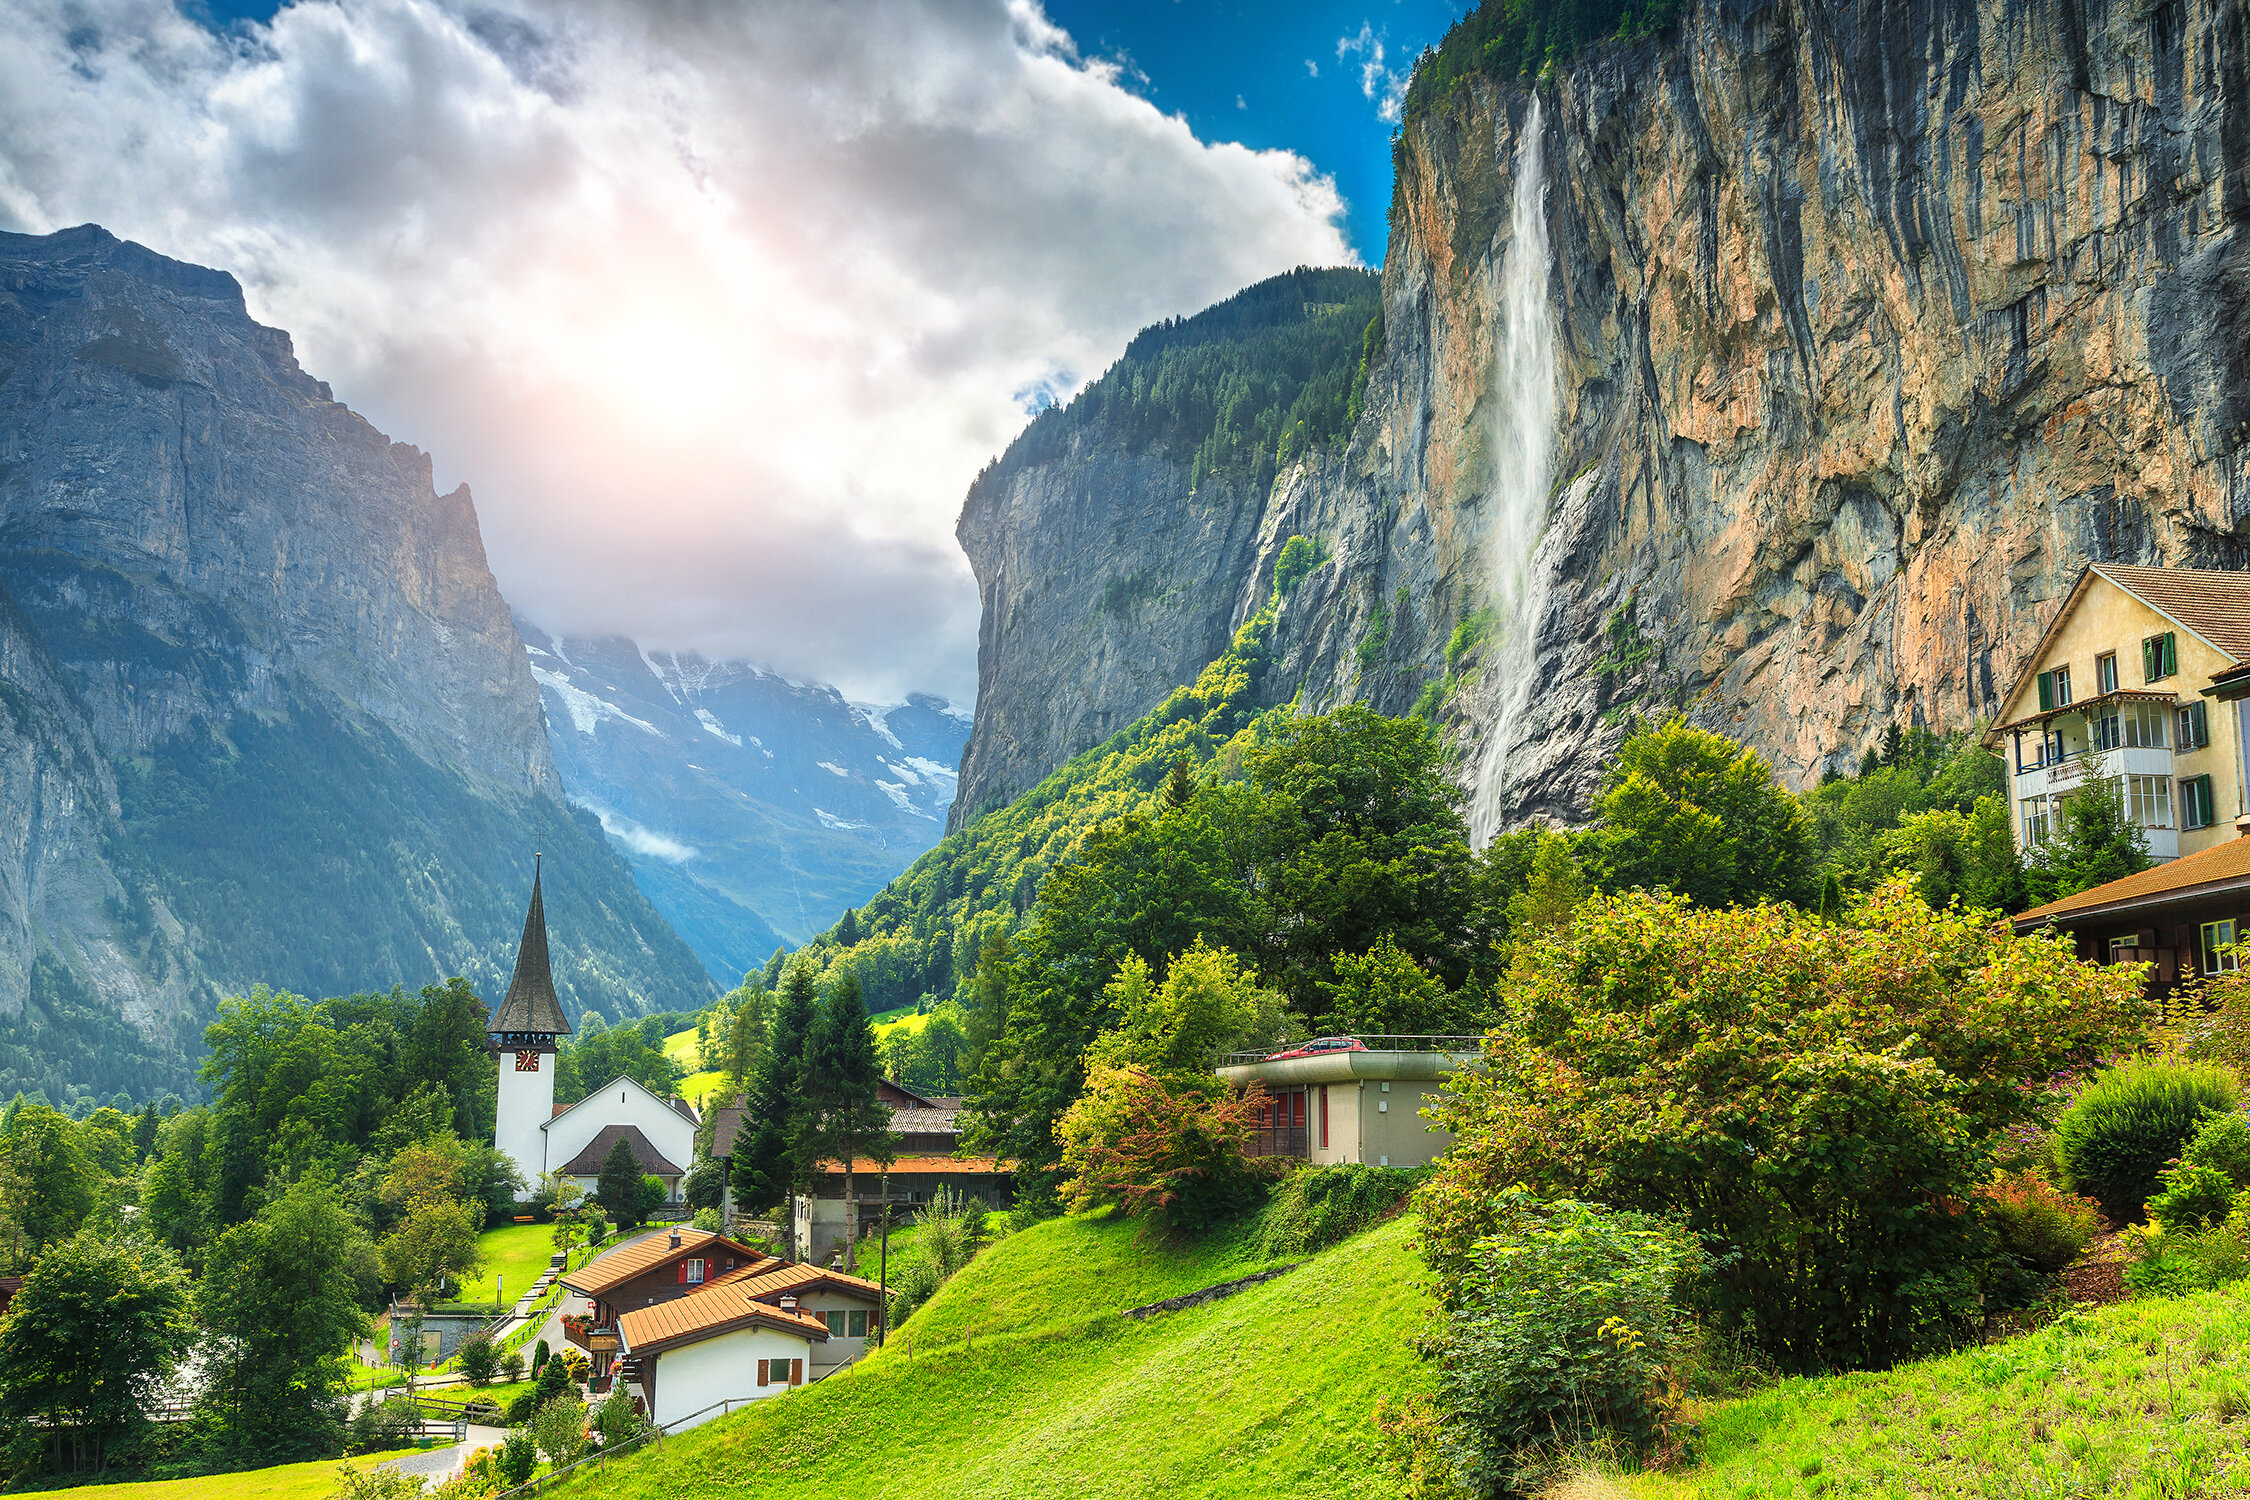  The village of Lauterbrunnen, Switzerland, home to 72 ethereal waterfalls.  